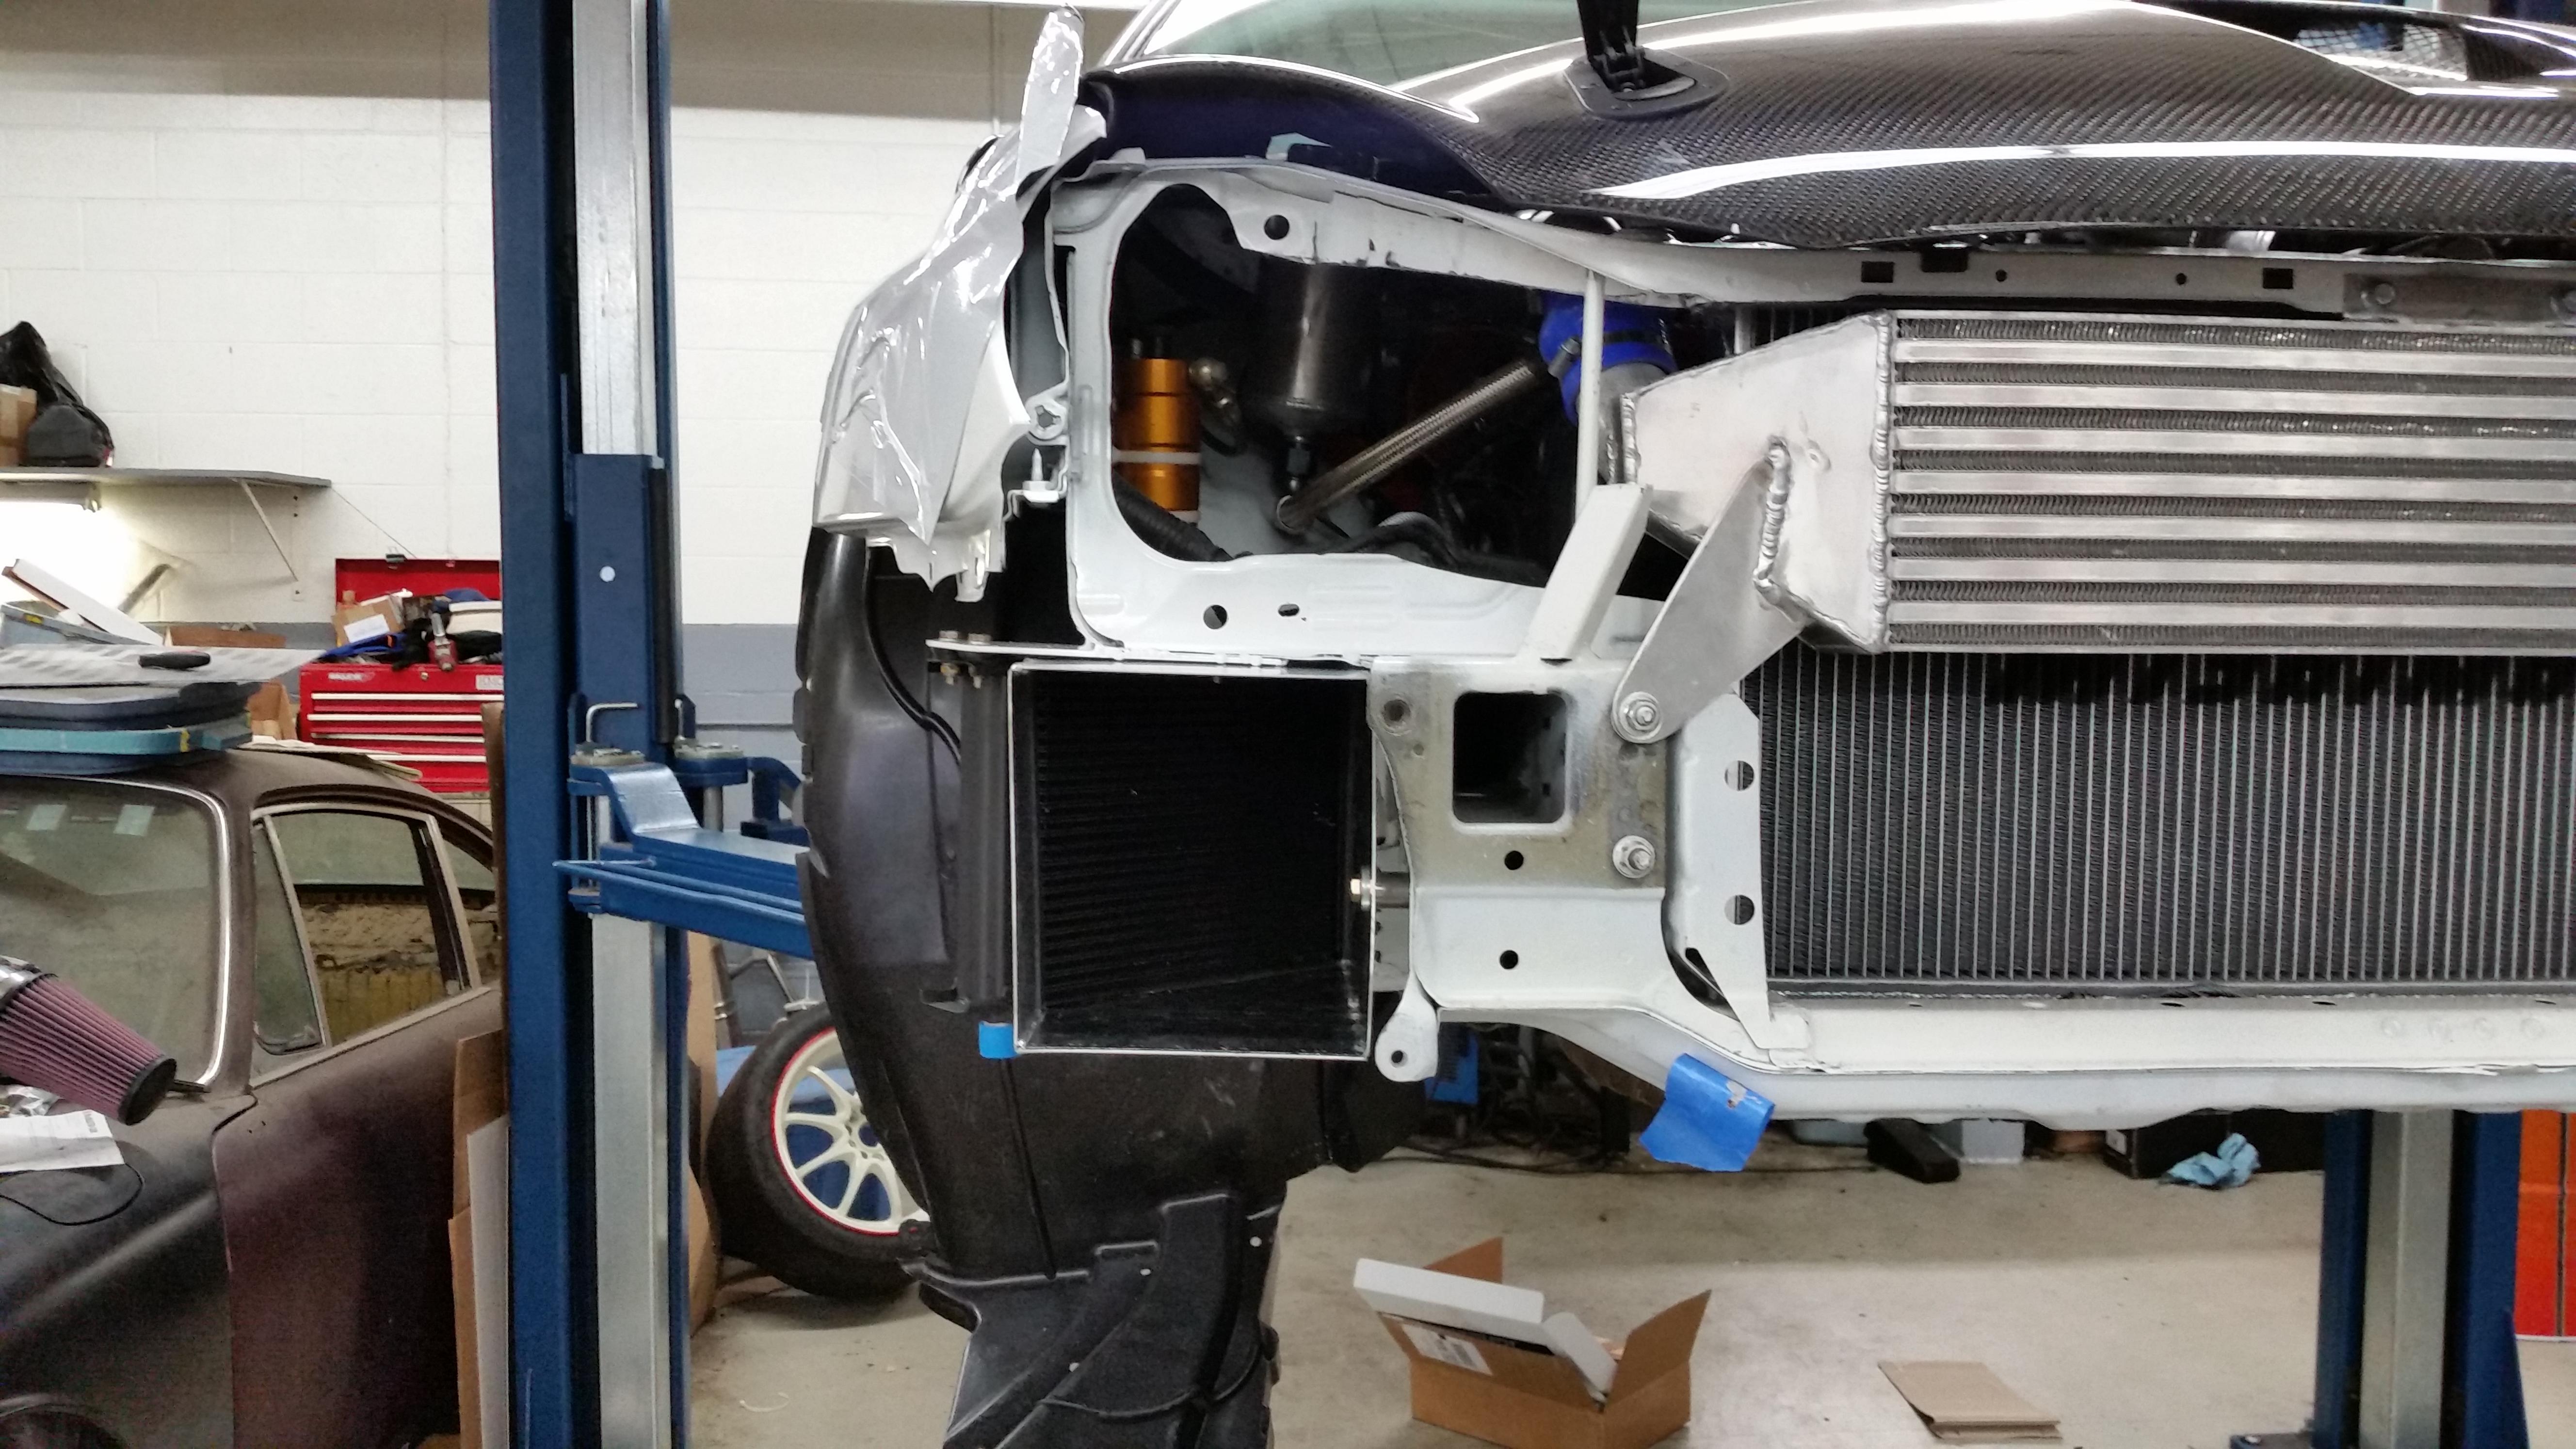 Mocal oil cooler setup (left), mounted in the front of the car. Front mounted intercooler and radiator also visible (right)